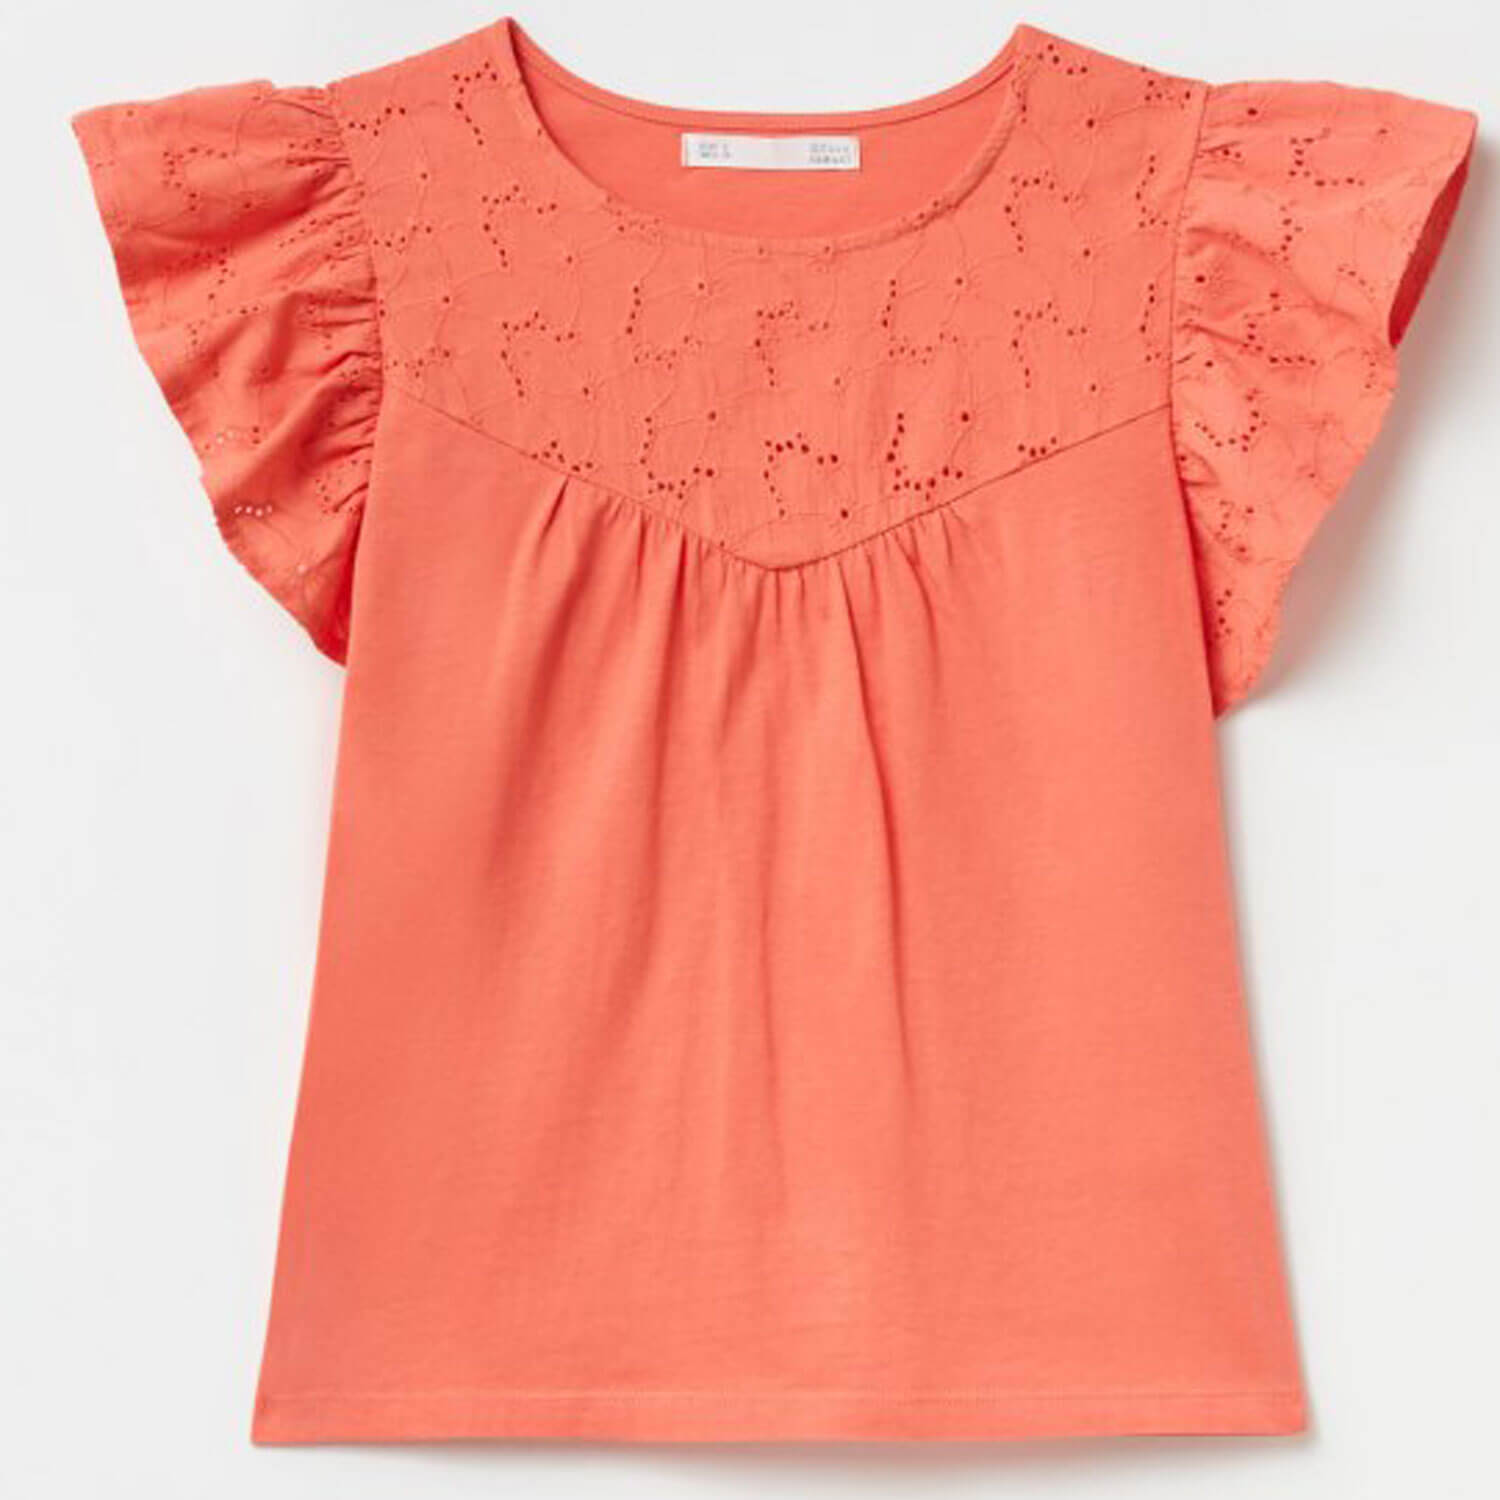 Sfera Embroidered Top 1 Shaws Department Stores